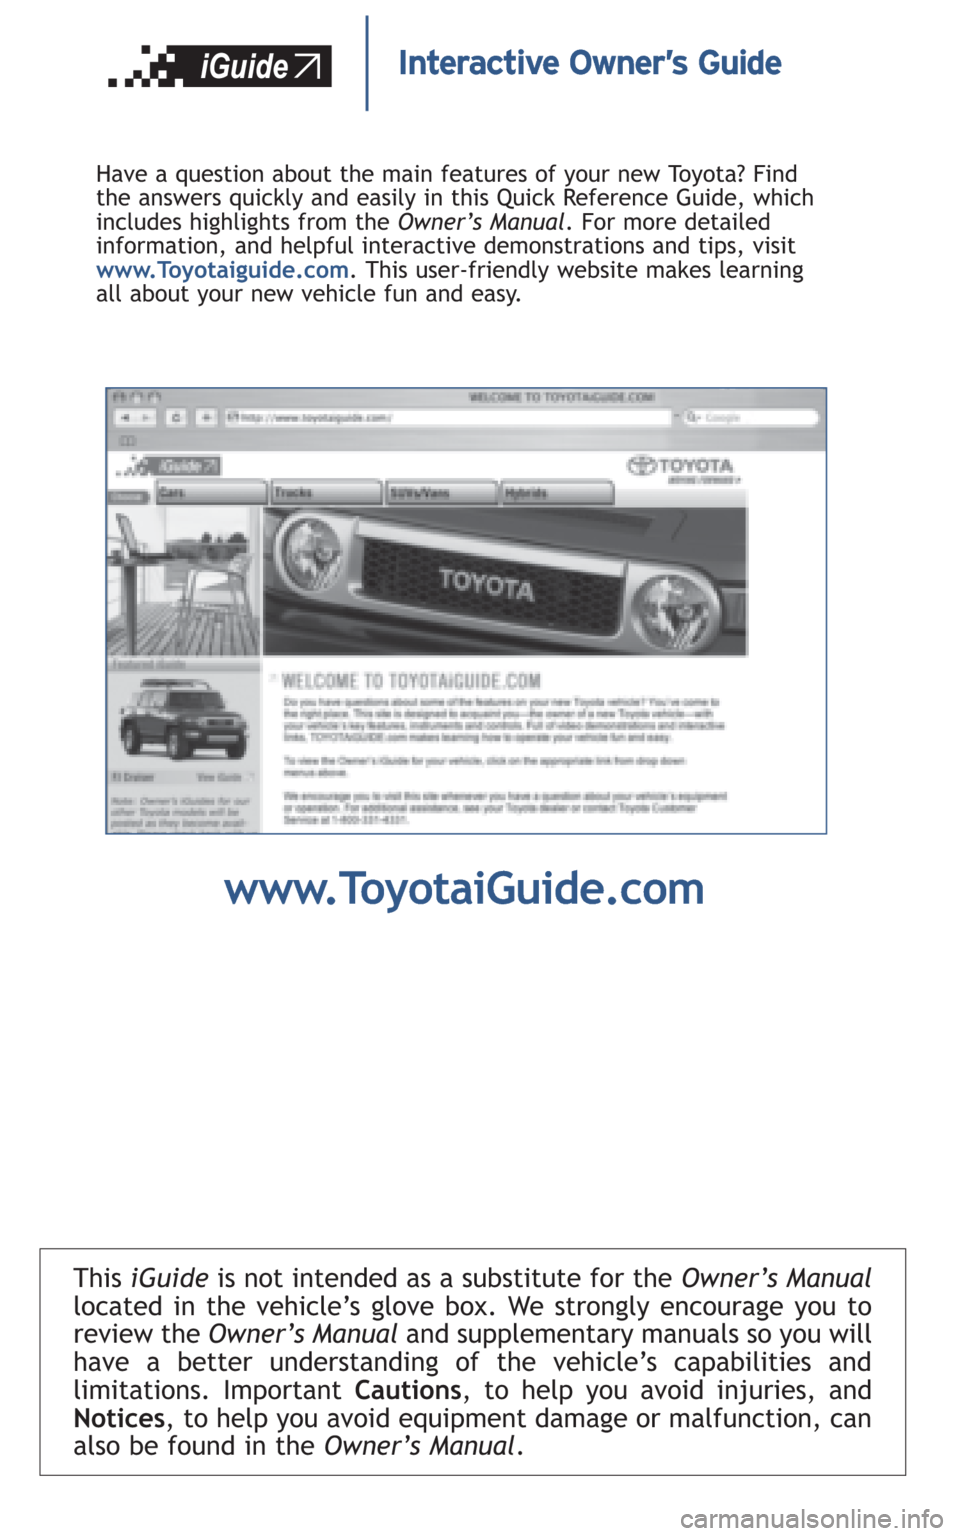 TOYOTA FJ CRUISER 2008 1.G Quick Reference Guide This iGuideis not intended as a substitute for theOwner’s Manual
located in the vehicle’s glove box. We strongly encourage you to
review theOwner’s Manual and supplementary manuals so you will
h